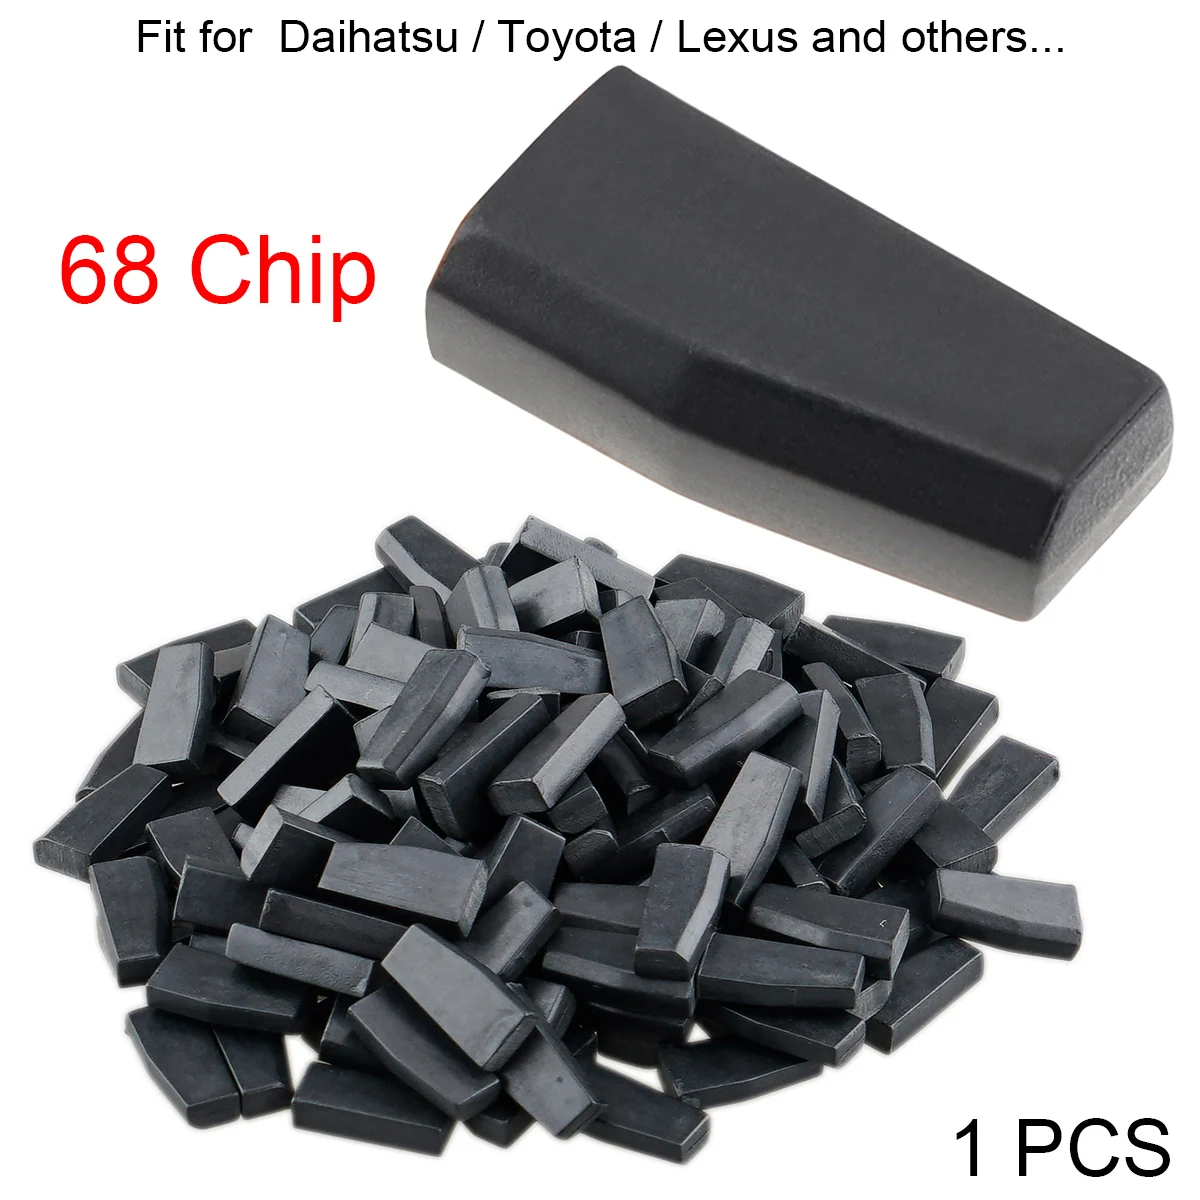 

1 Piece Blank 4D68 ID68 40Bits Carbon Chip Car Key Transponder Chip Fit for Daihatsu Toyota and Lexus etc